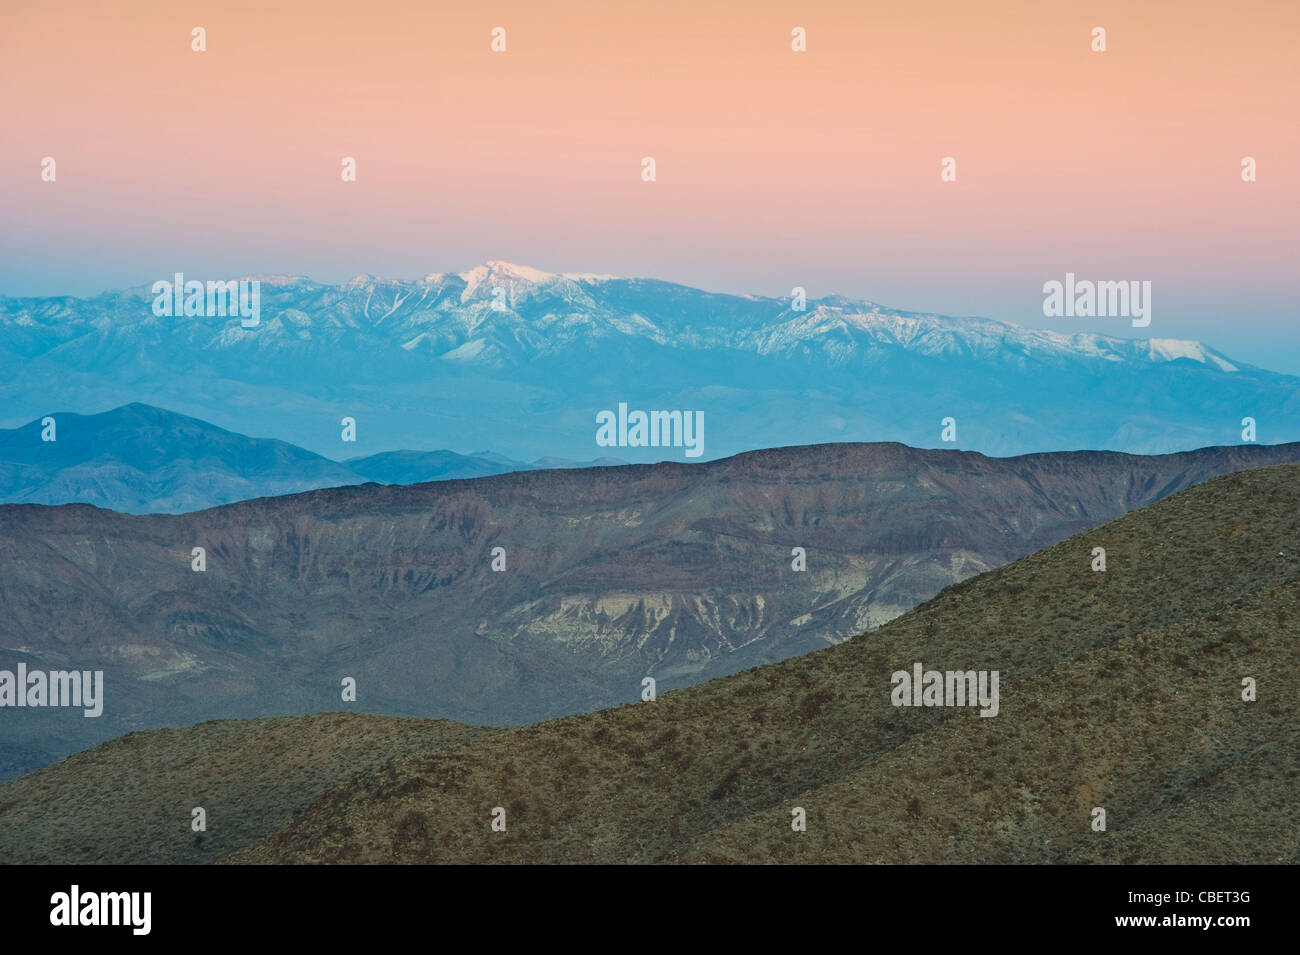 Sunset & Distant Snow Capped Mountains Of The Sierra Nevadas, California, USA Stock Photo